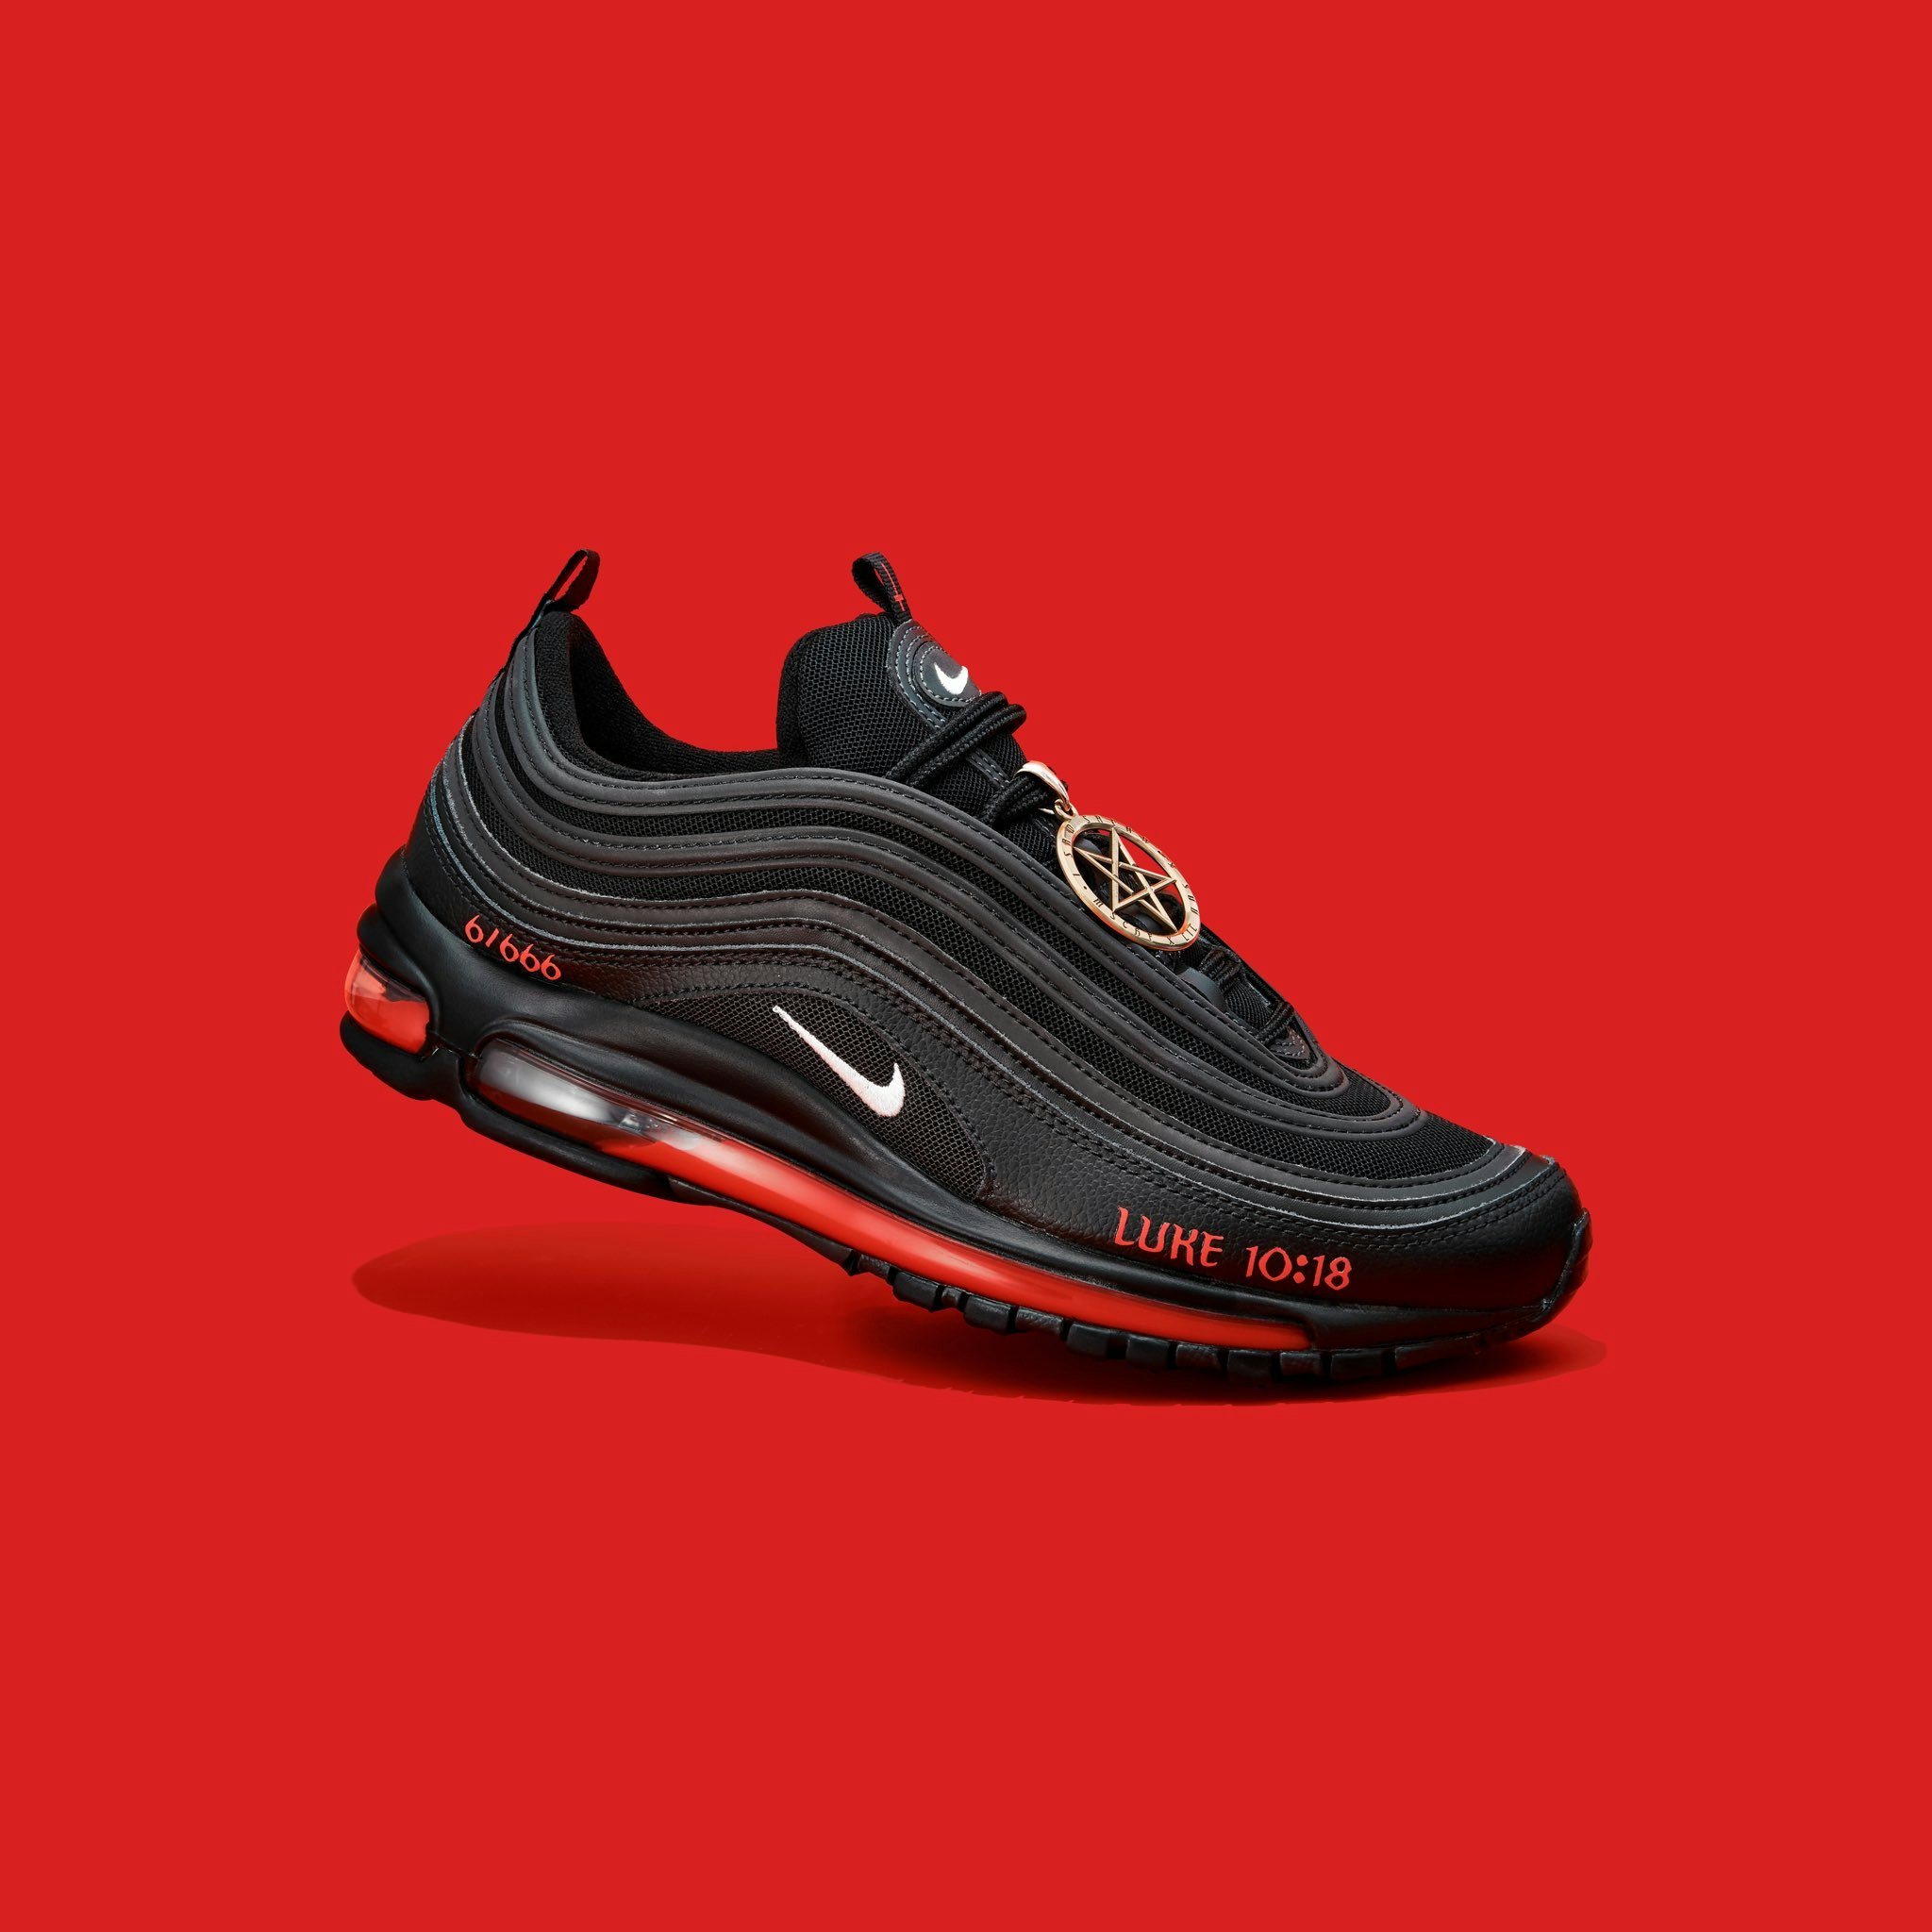 when did 97s come out